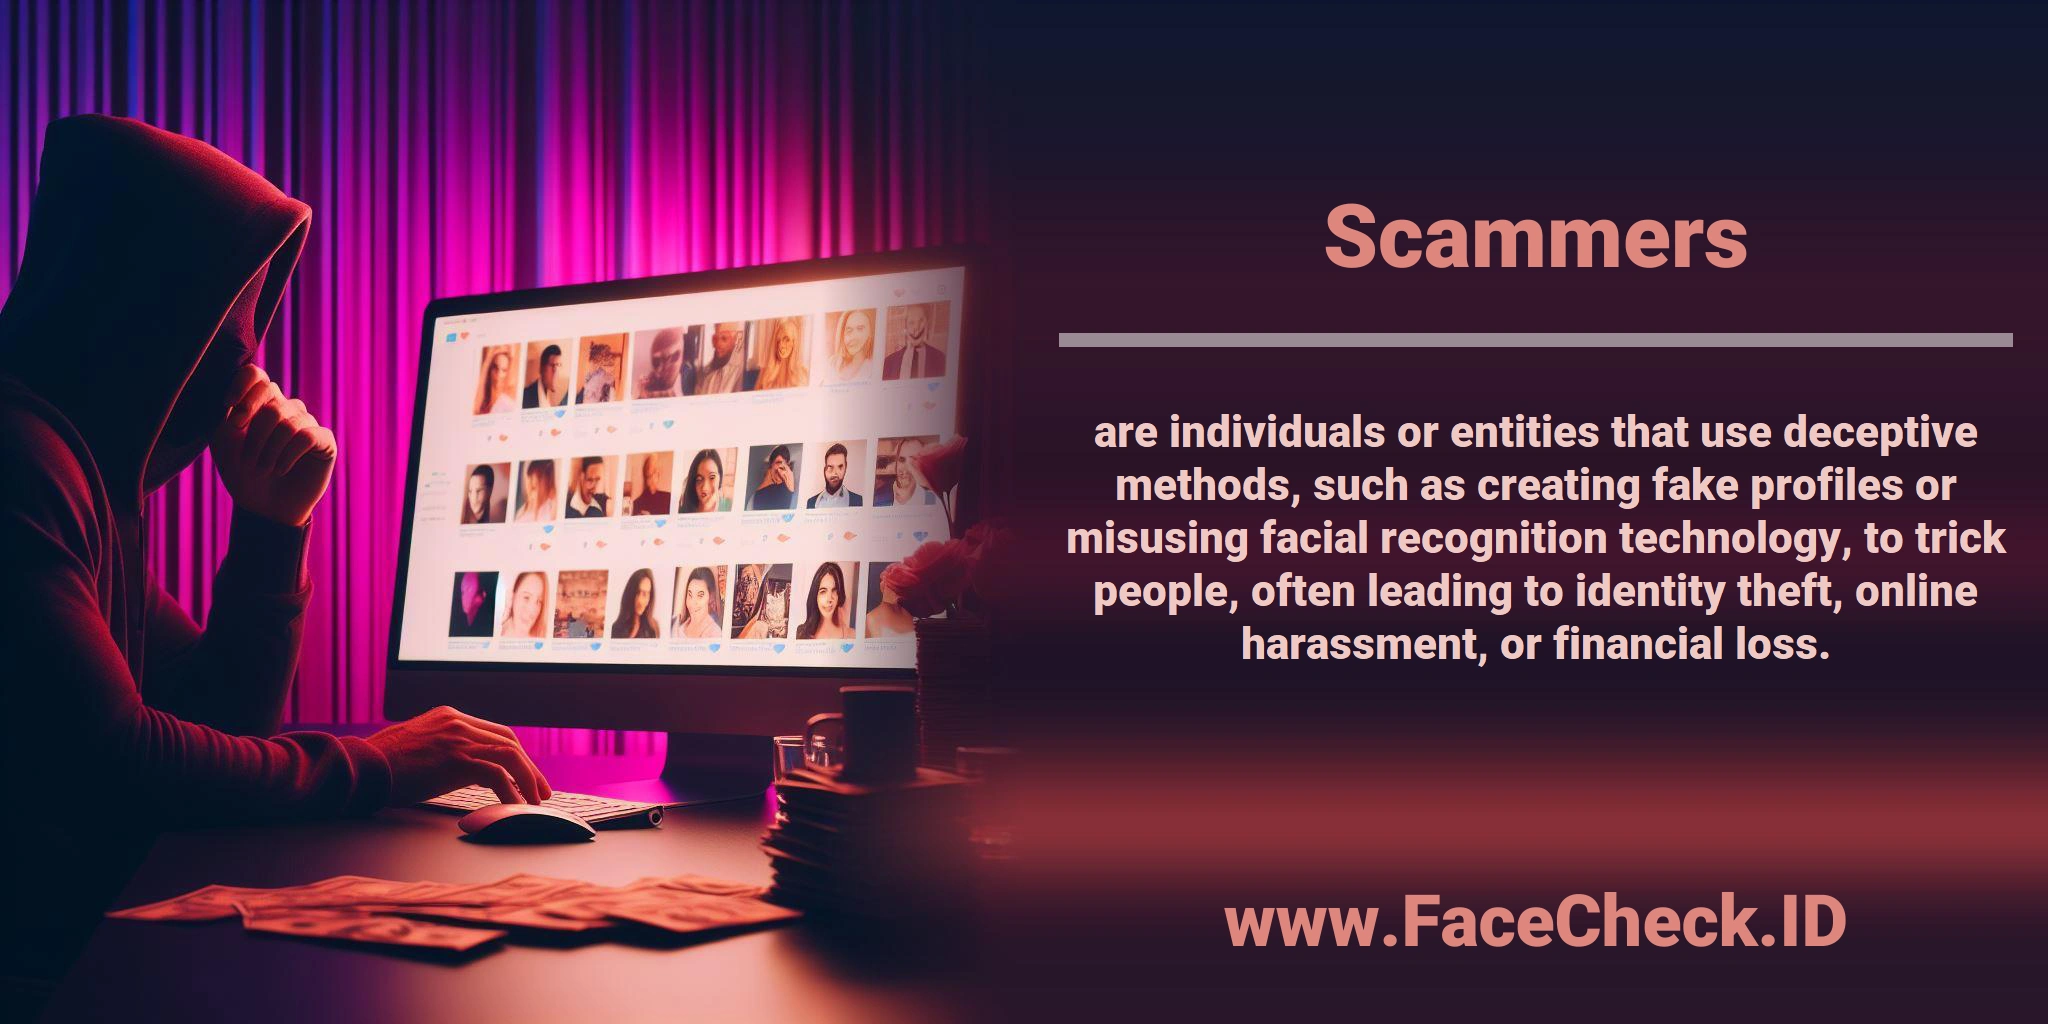 <b>Scammers</b> are individuals or entities that use deceptive methods, such as creating fake profiles or misusing facial recognition technology, to trick people, often leading to identity theft, online harassment, or financial loss.